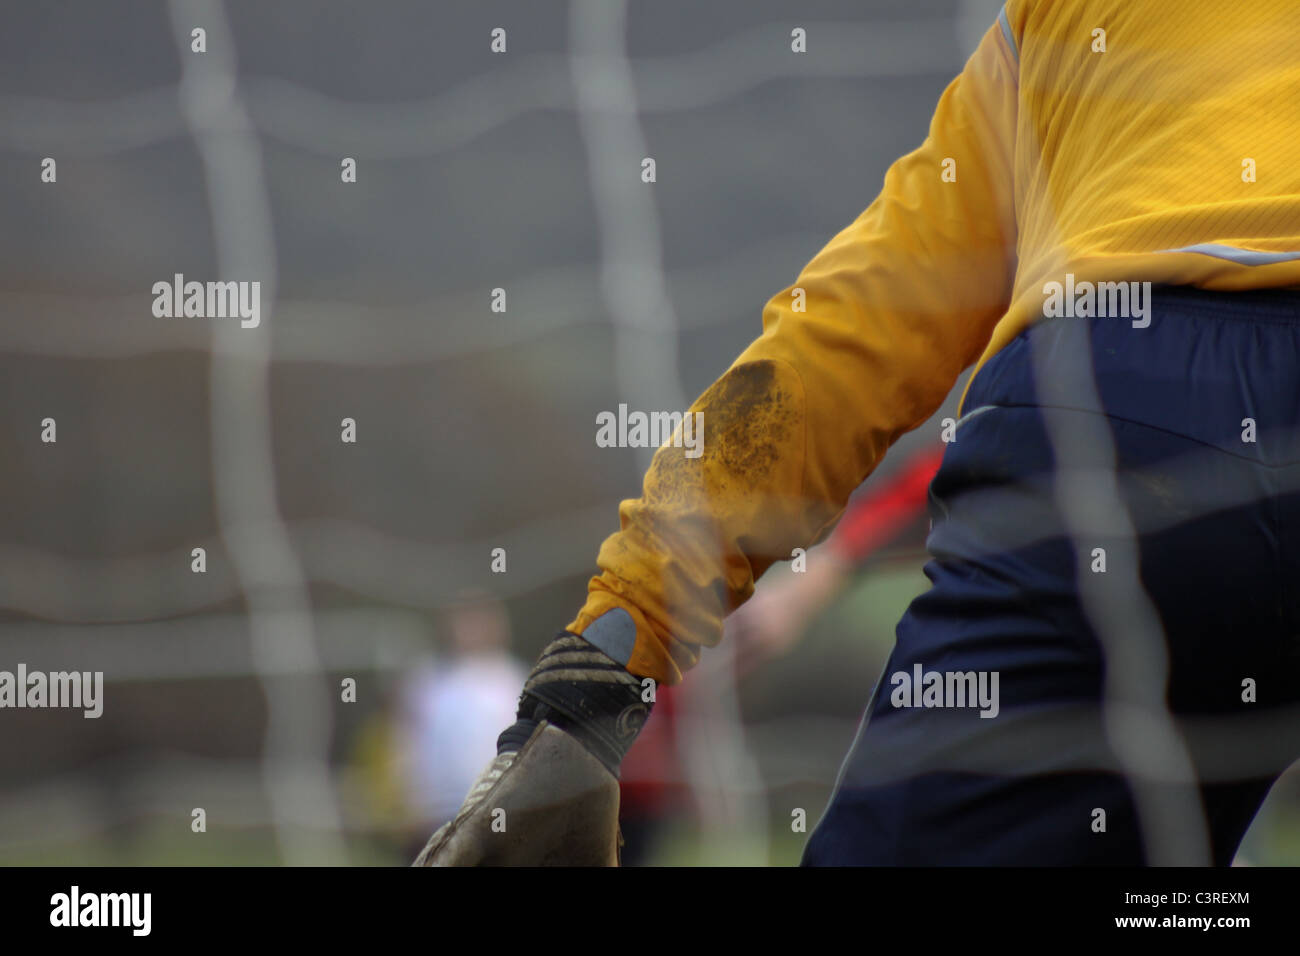 Goalkeeper playing football in front of football net Stock Photo